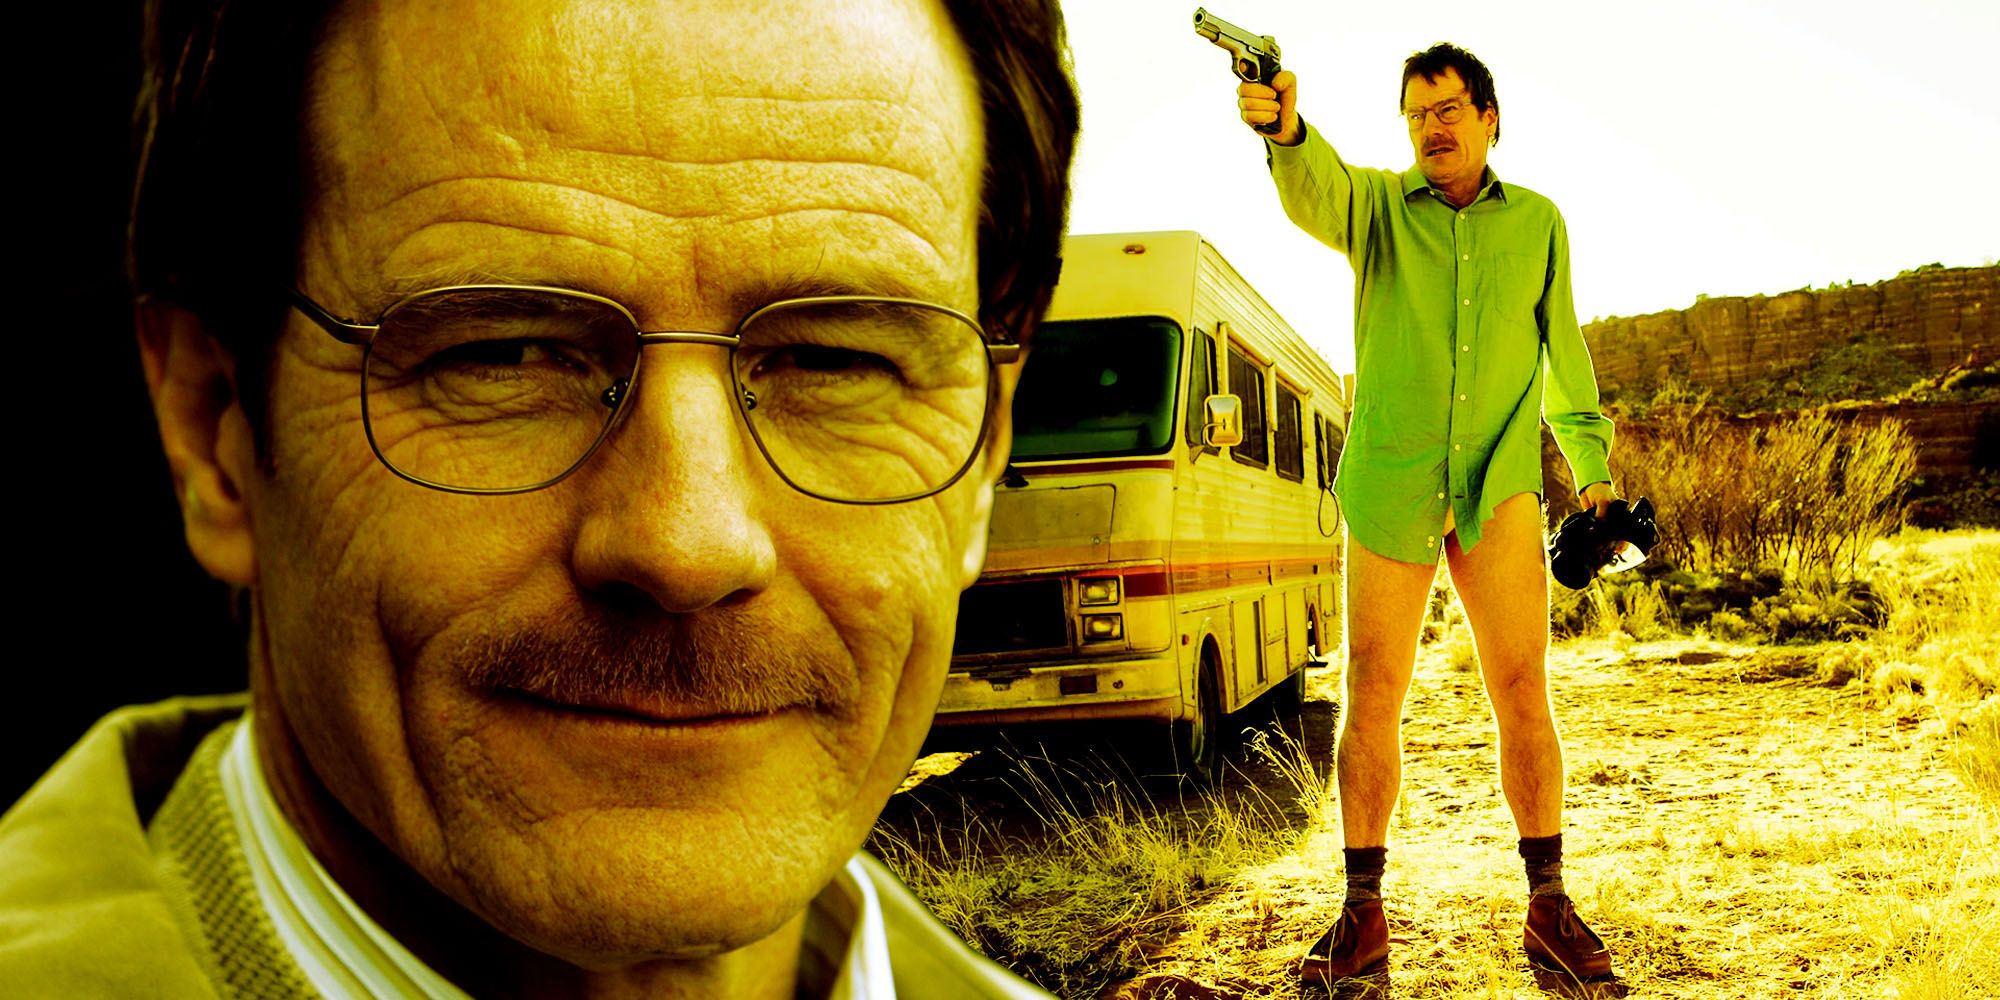 Breaking Bad' Changed Television Forever By Being Exceptional